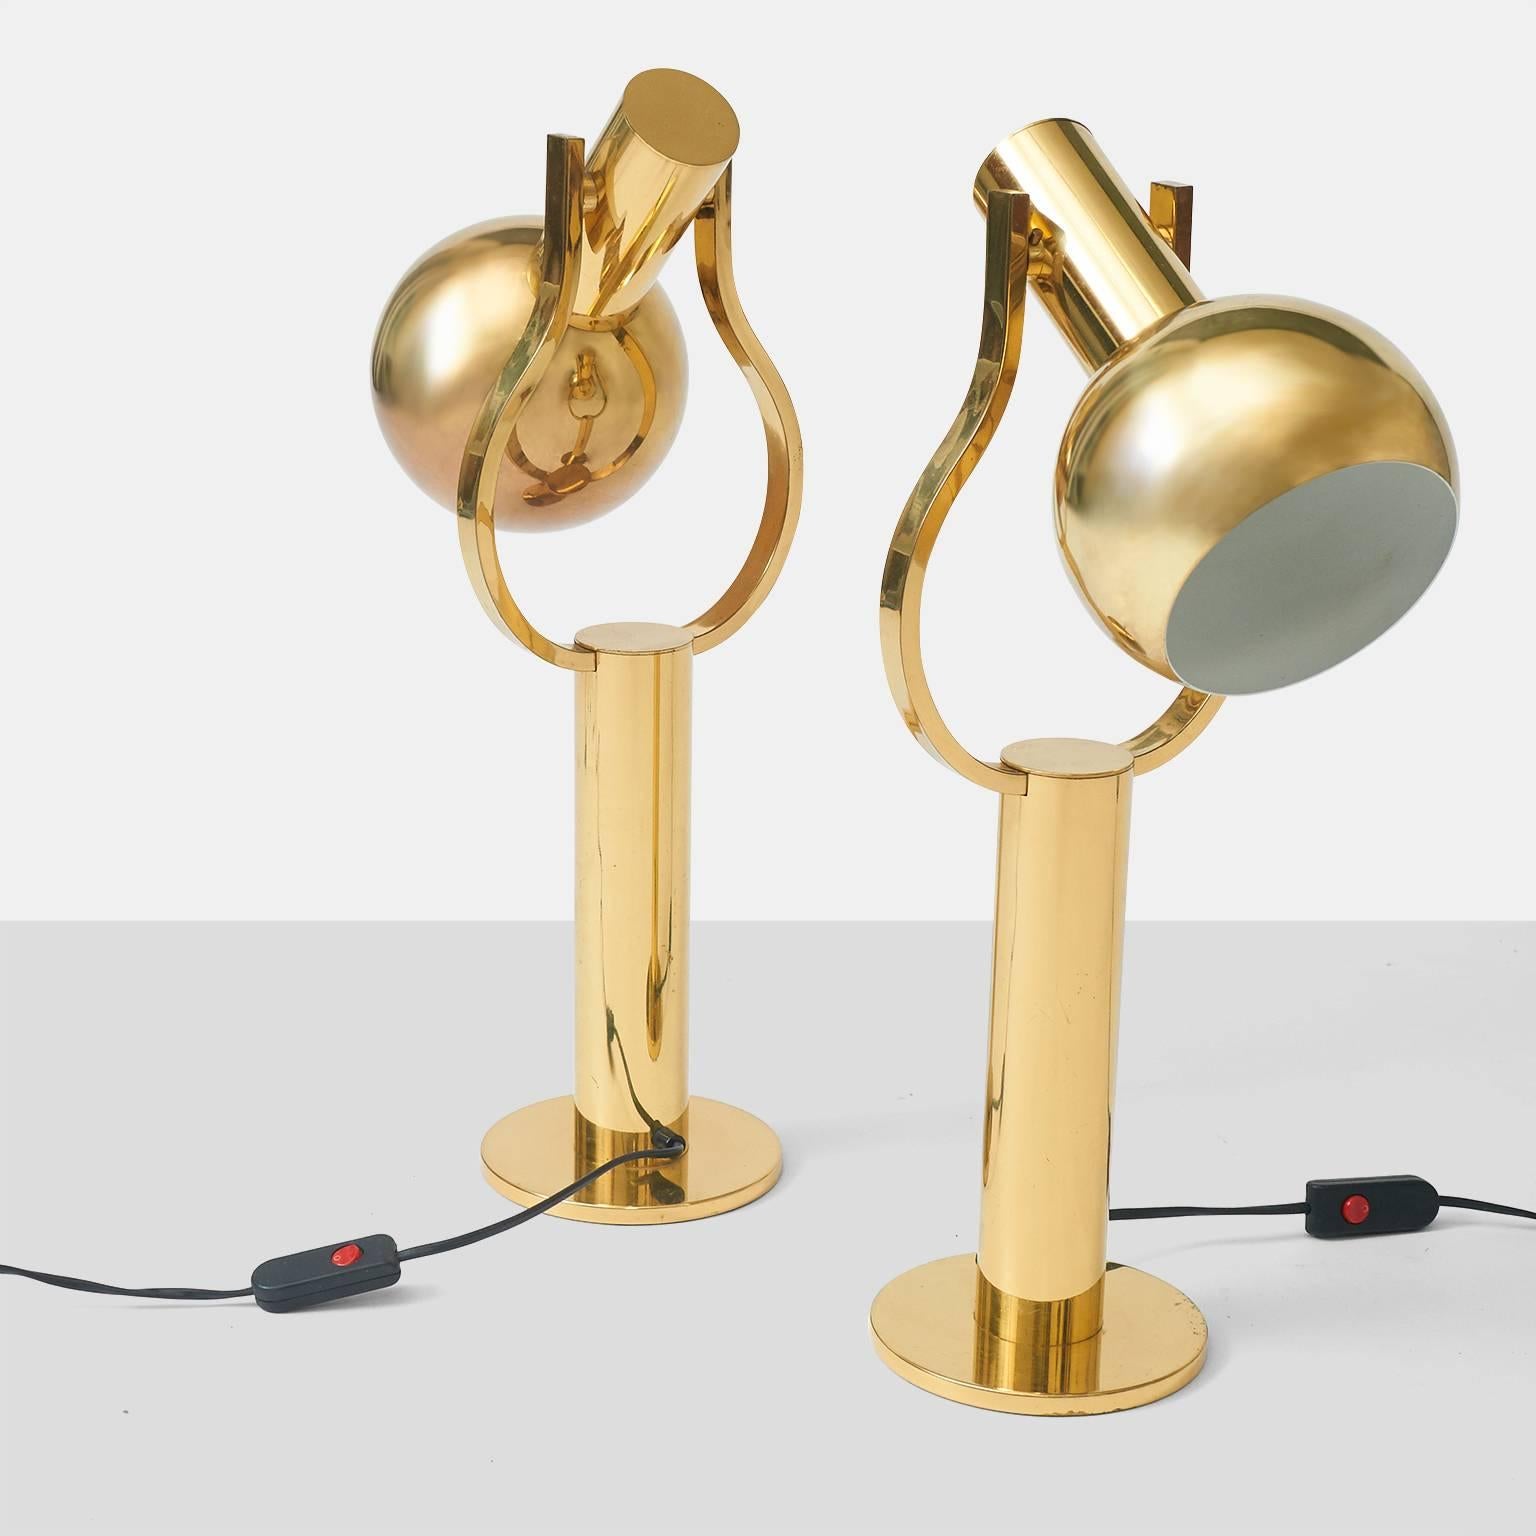 A pair of brass table lamps with shades that adjust 180 degrees to aim the light in multiple directions. Made in Germany by Staff. Each lamp will take a 60 watt bulb.